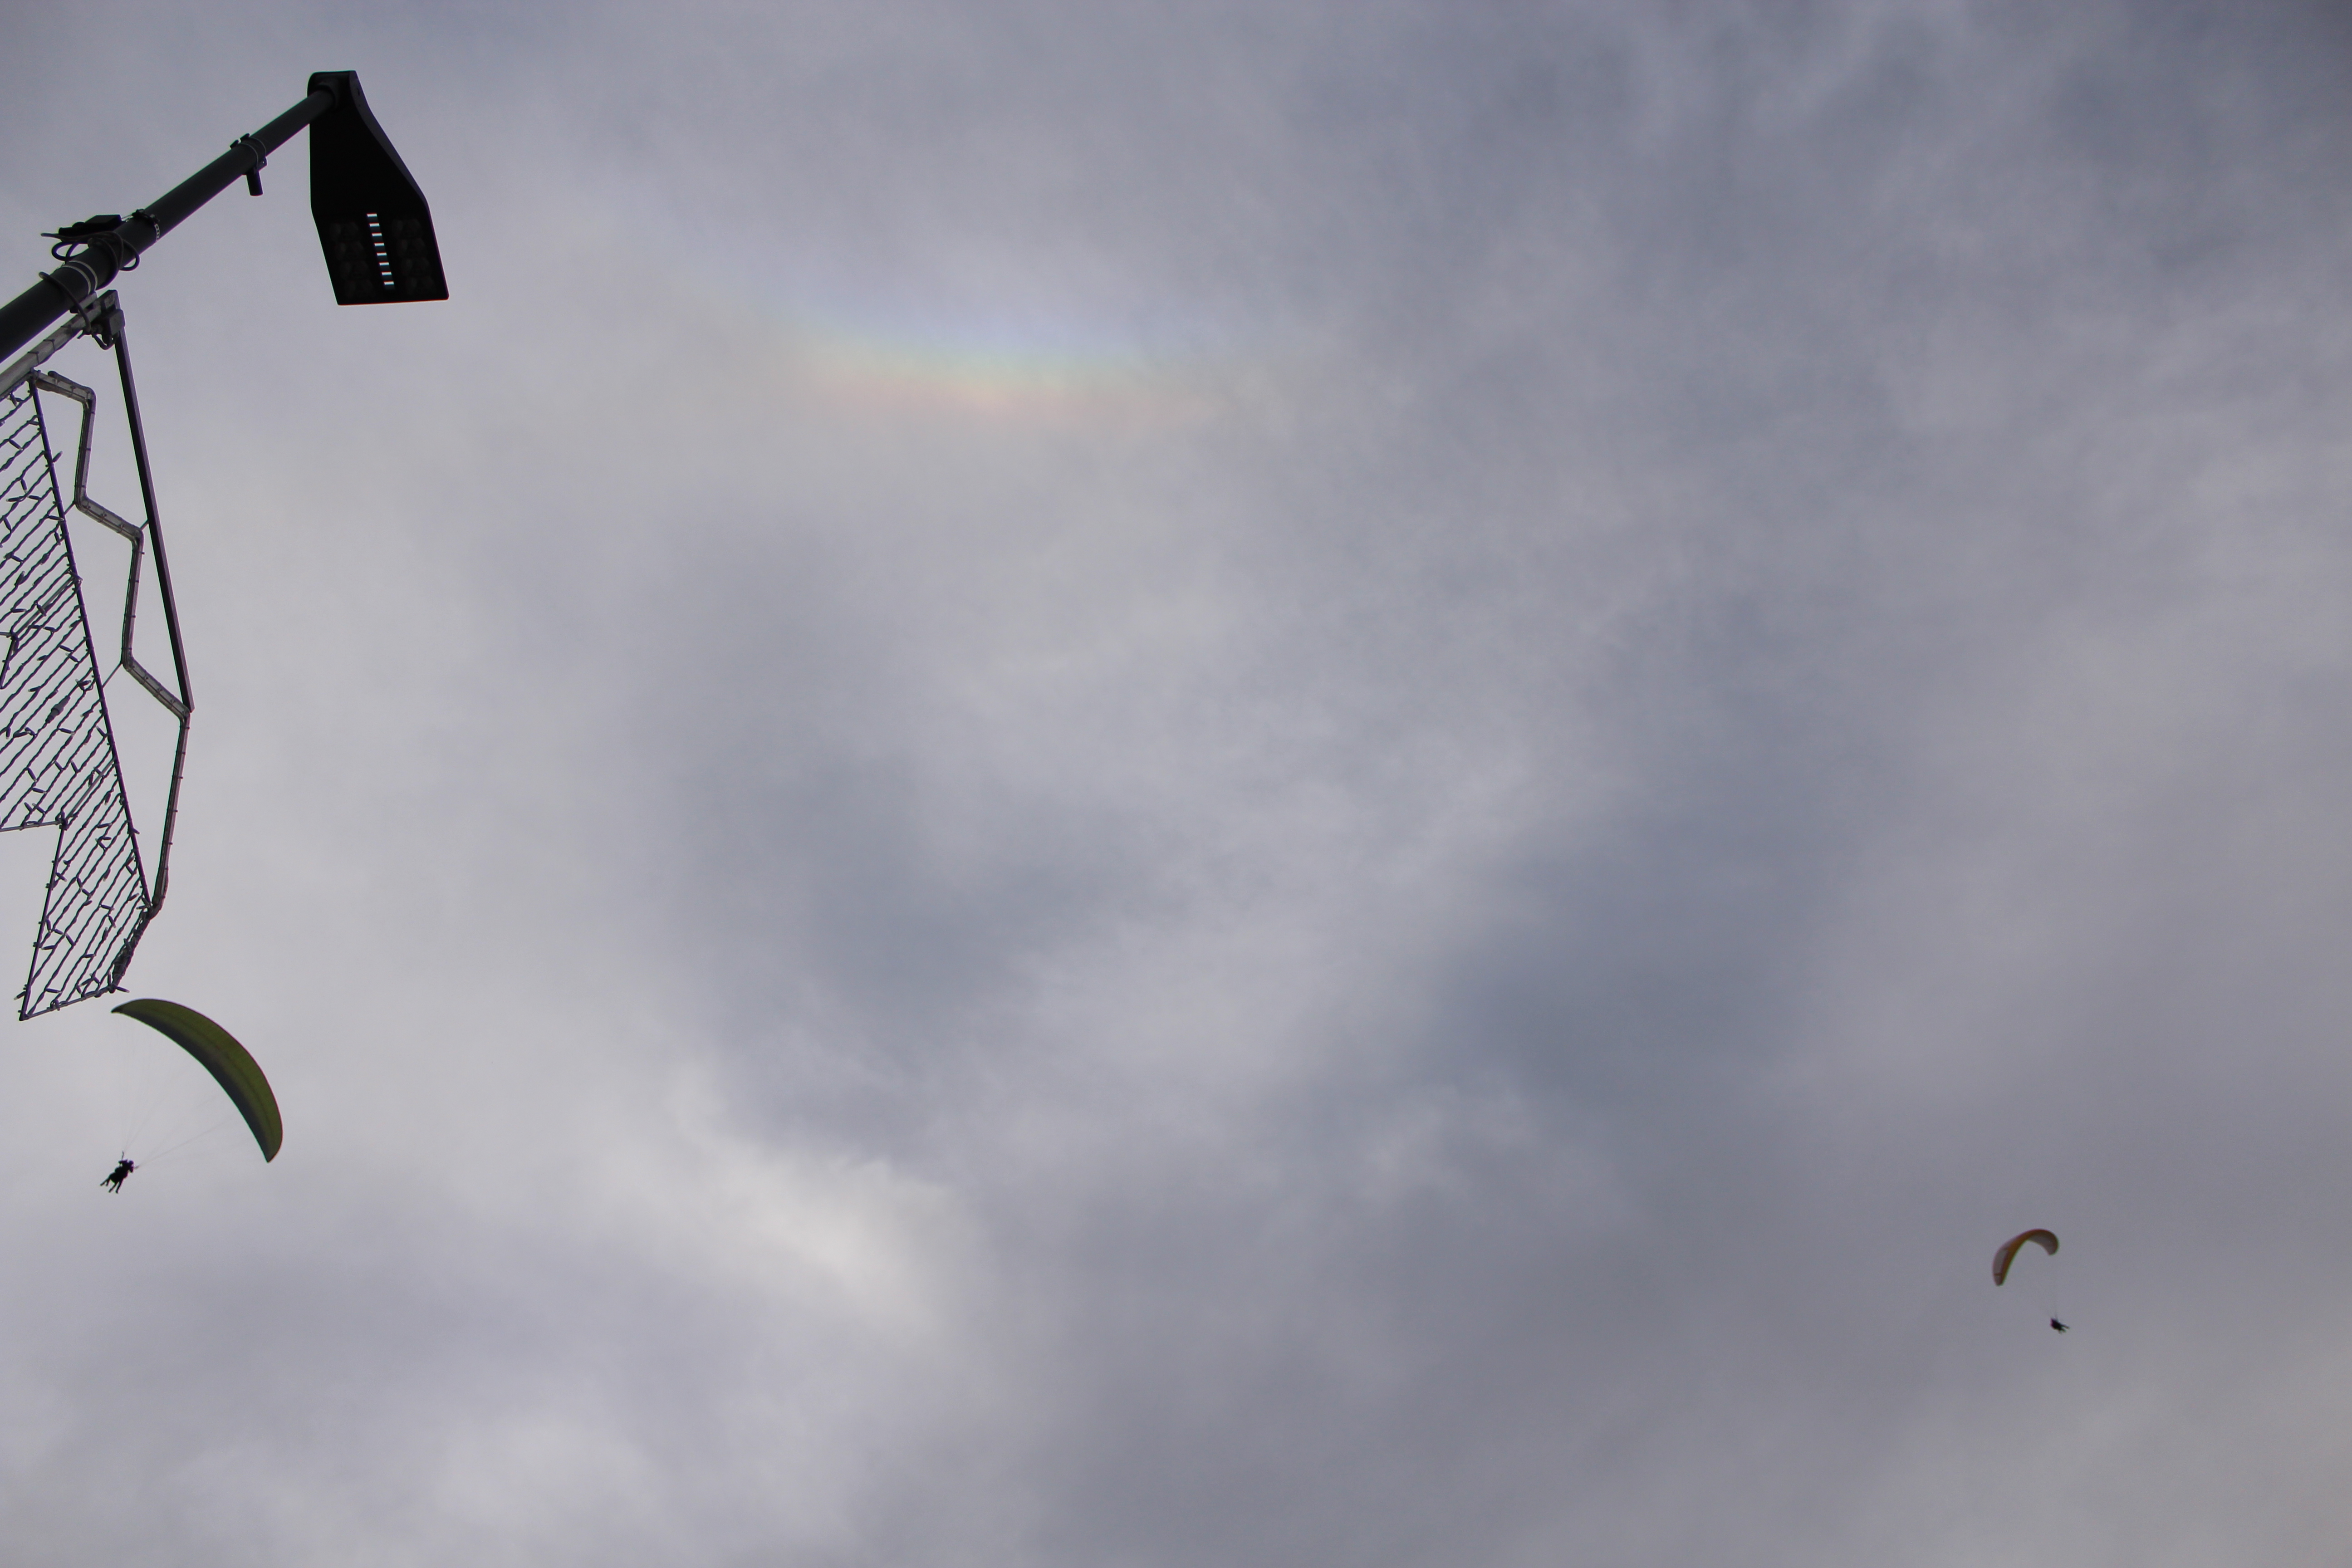 Paragliders and a patch of rainbow in the clouds